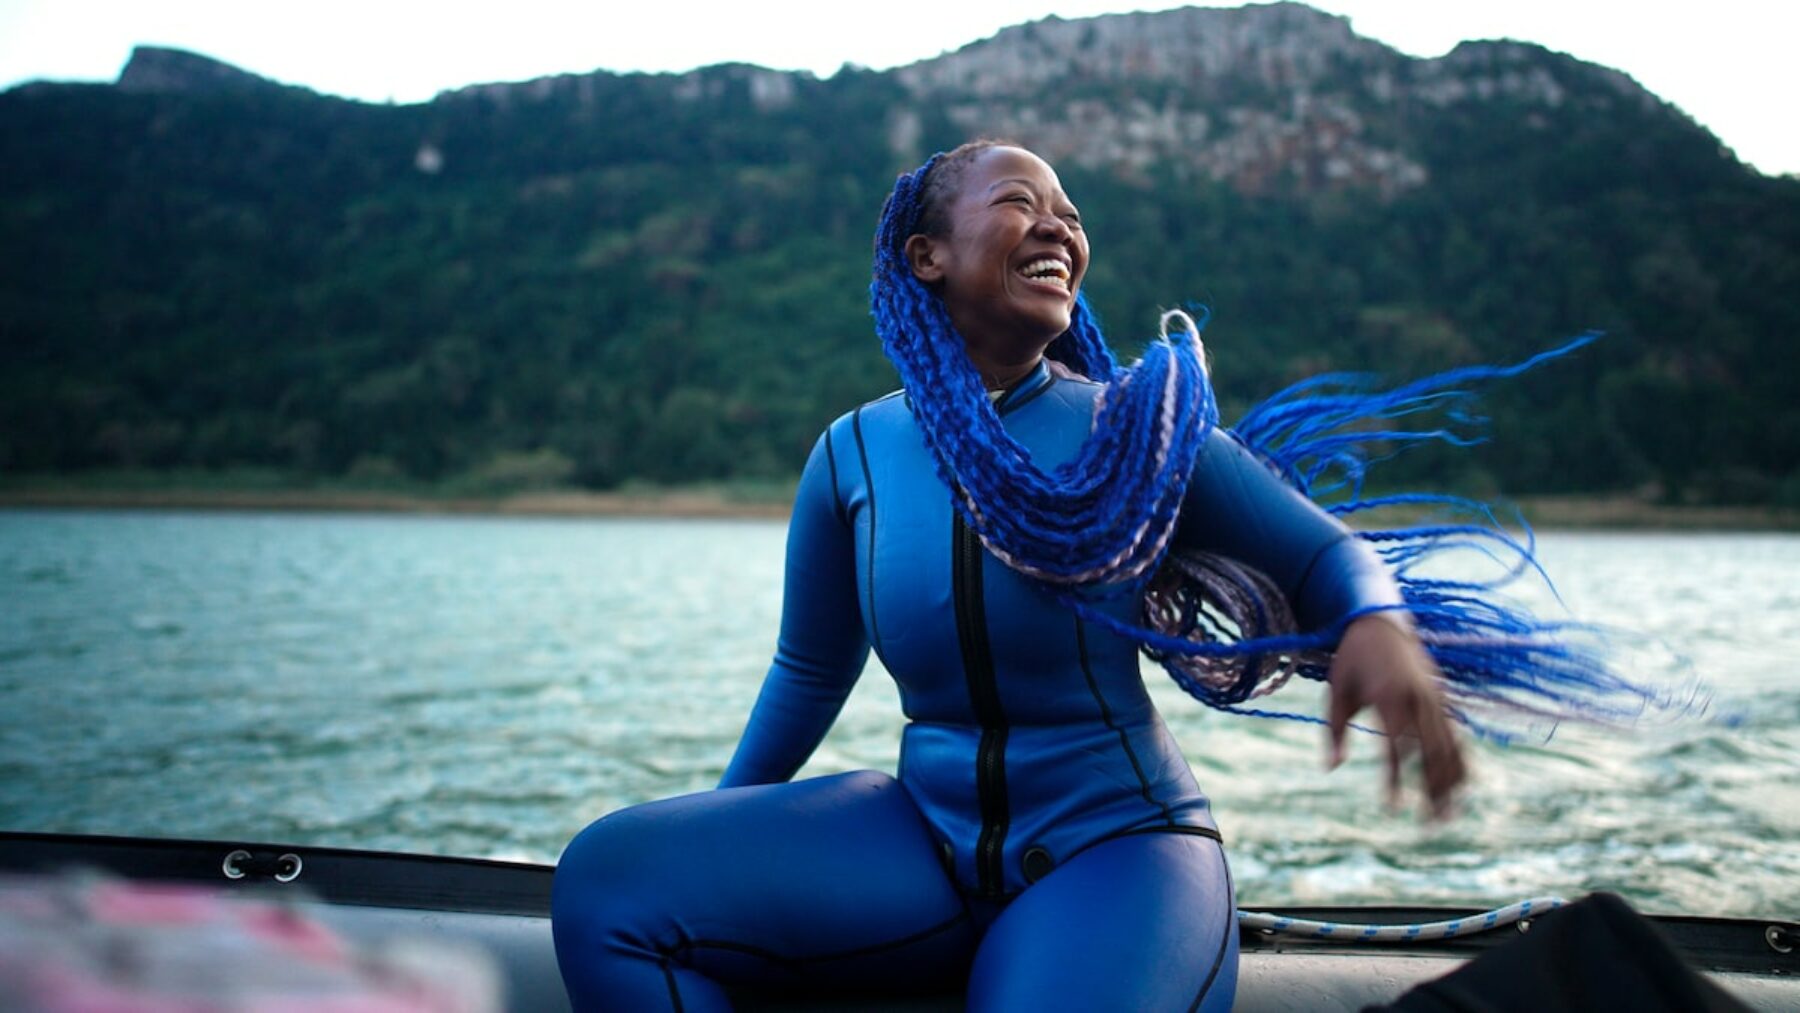 Image for South Africa’s ‘black mermaid’ is changing ocean narratives